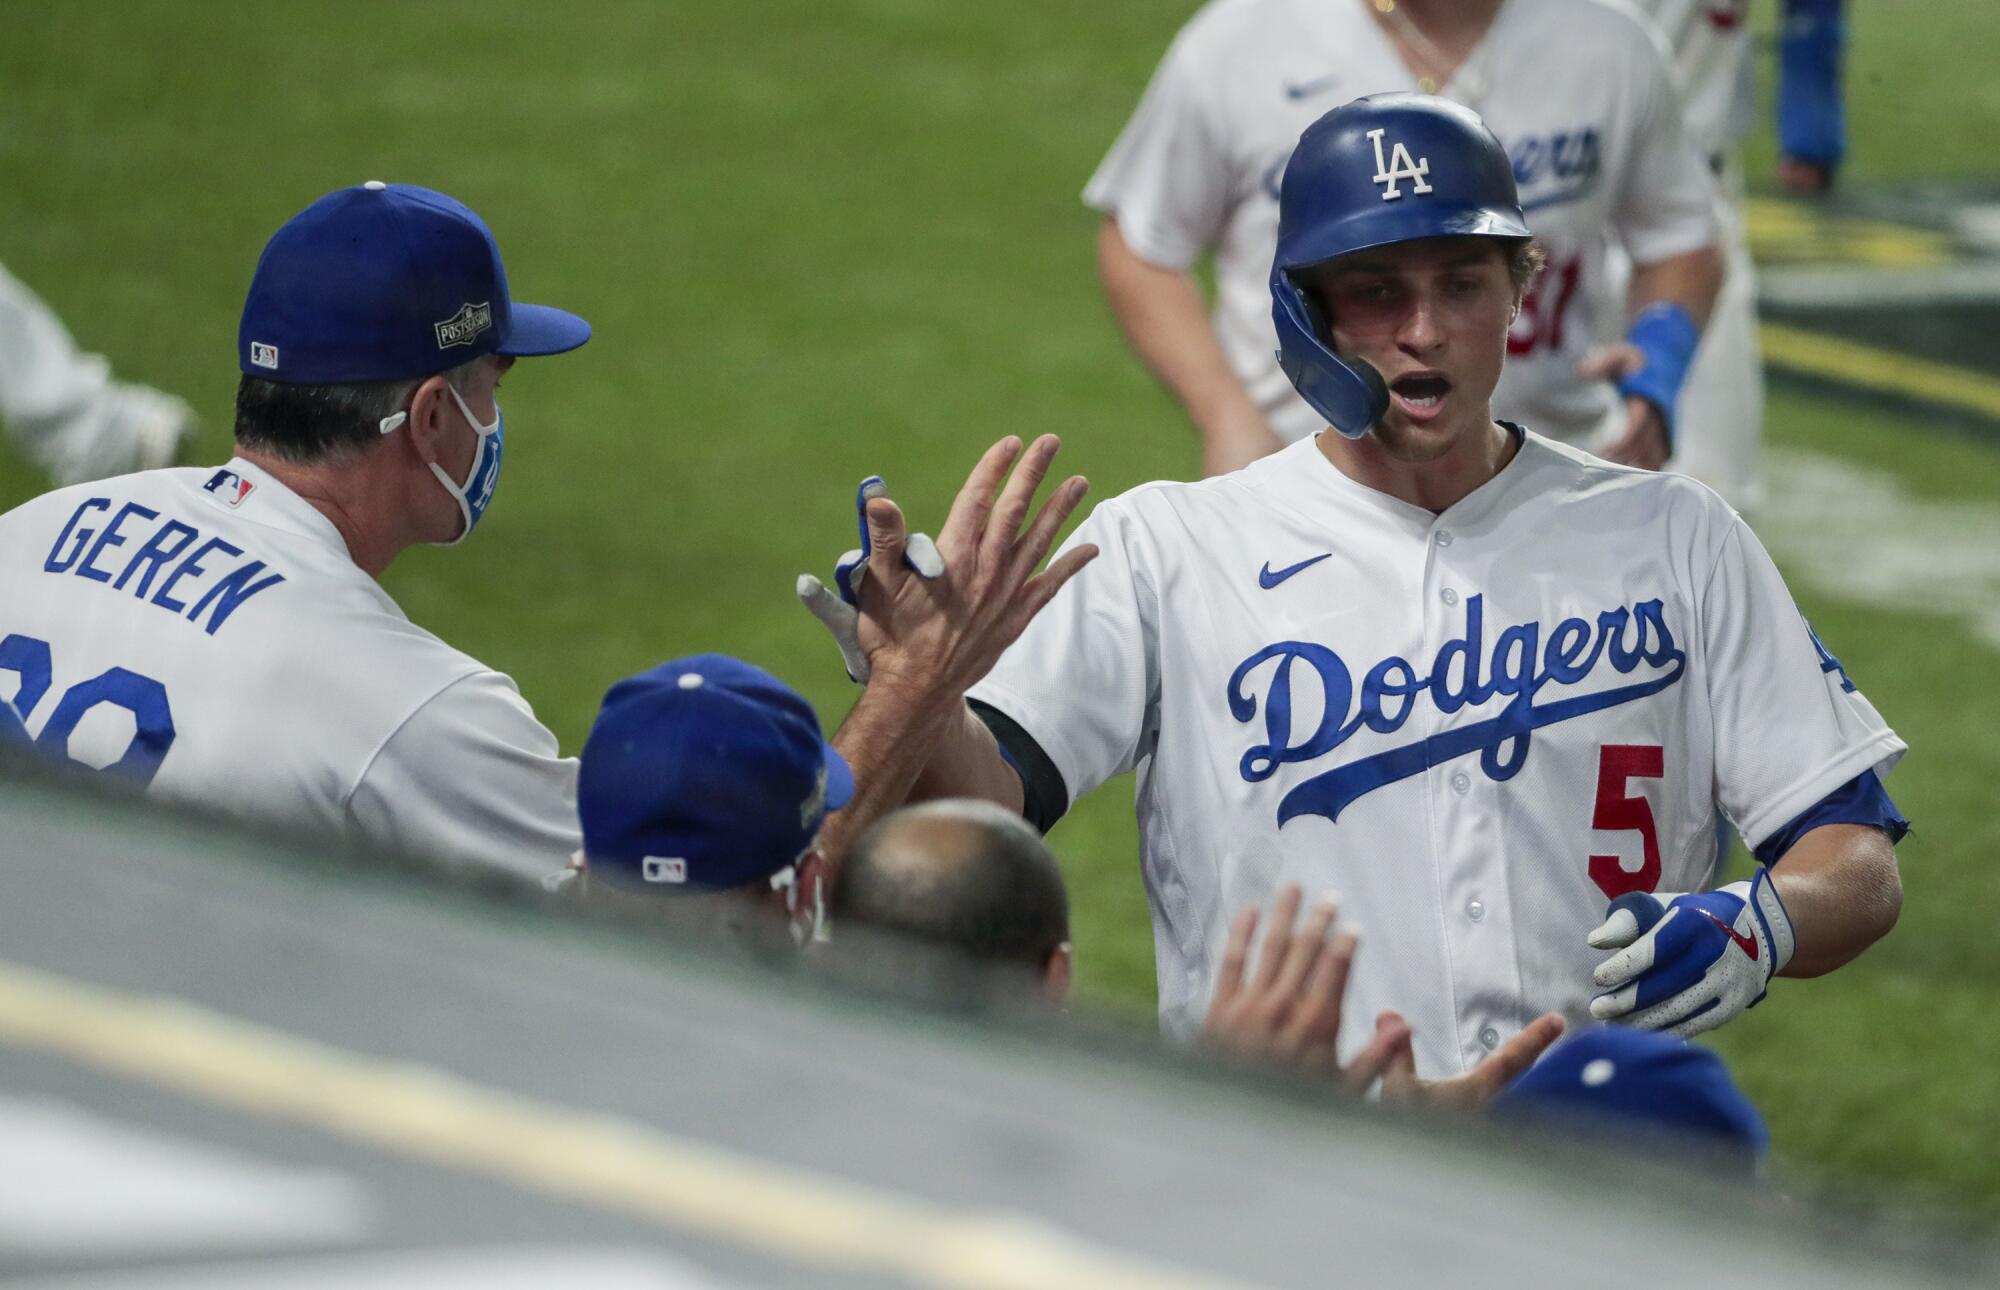 Dodgers shortstop Corey Seager is congratulated by bench coach Bob Geren after hitting a three-run home run.